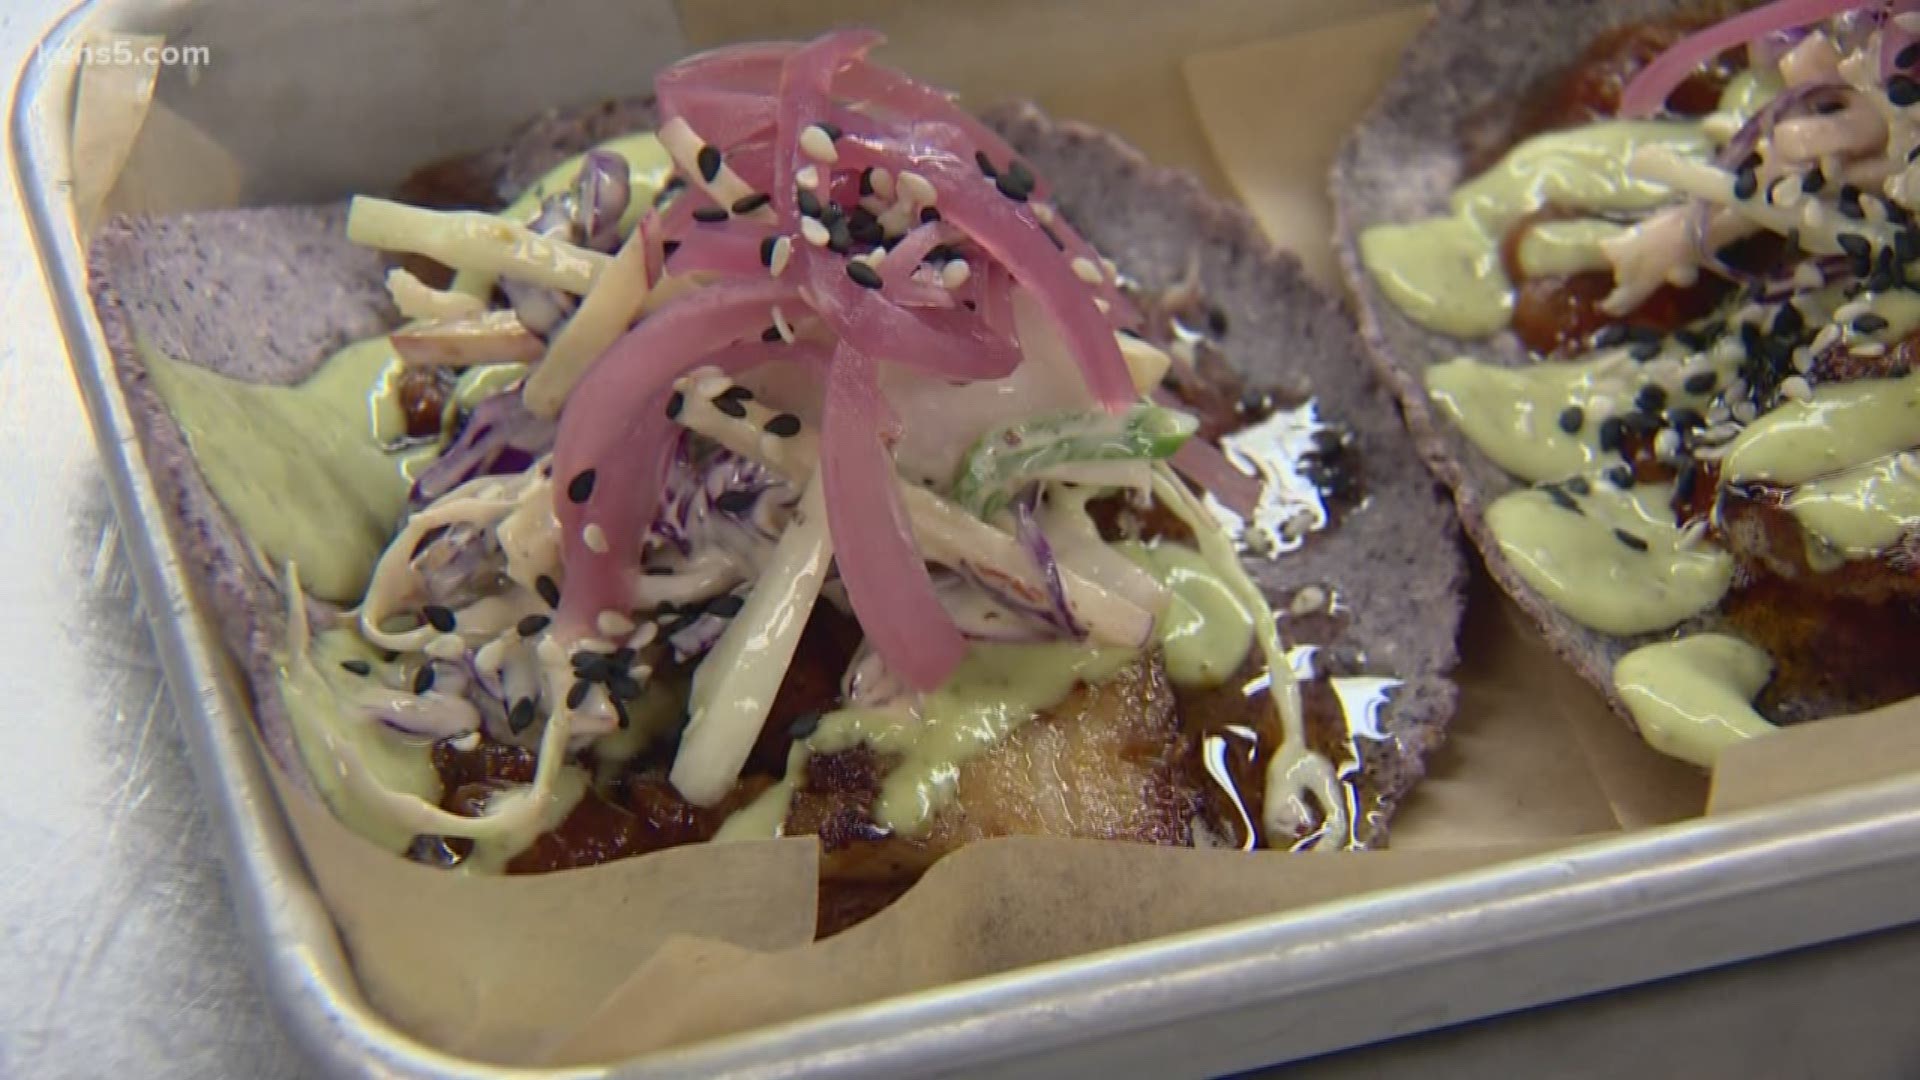 If great tacos are your thing, then KENS 5's Marvin Hurst says you've got to try a budding business called 'Catch the Wave.'